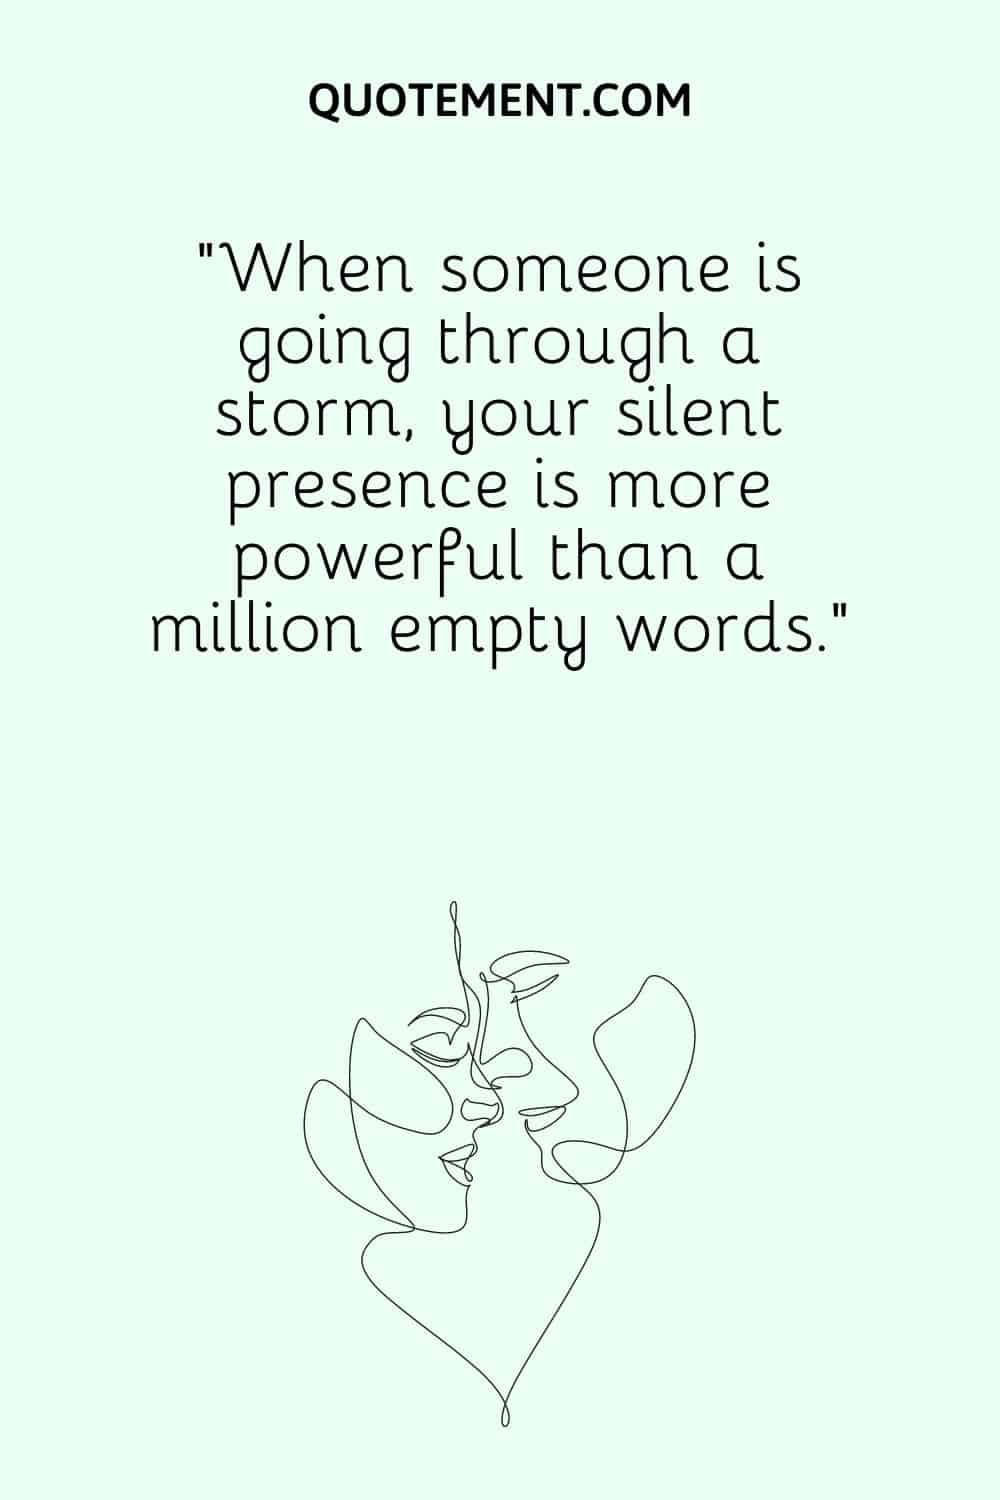 “When someone is going through a storm, your silent presence is more powerful than a million empty words.”